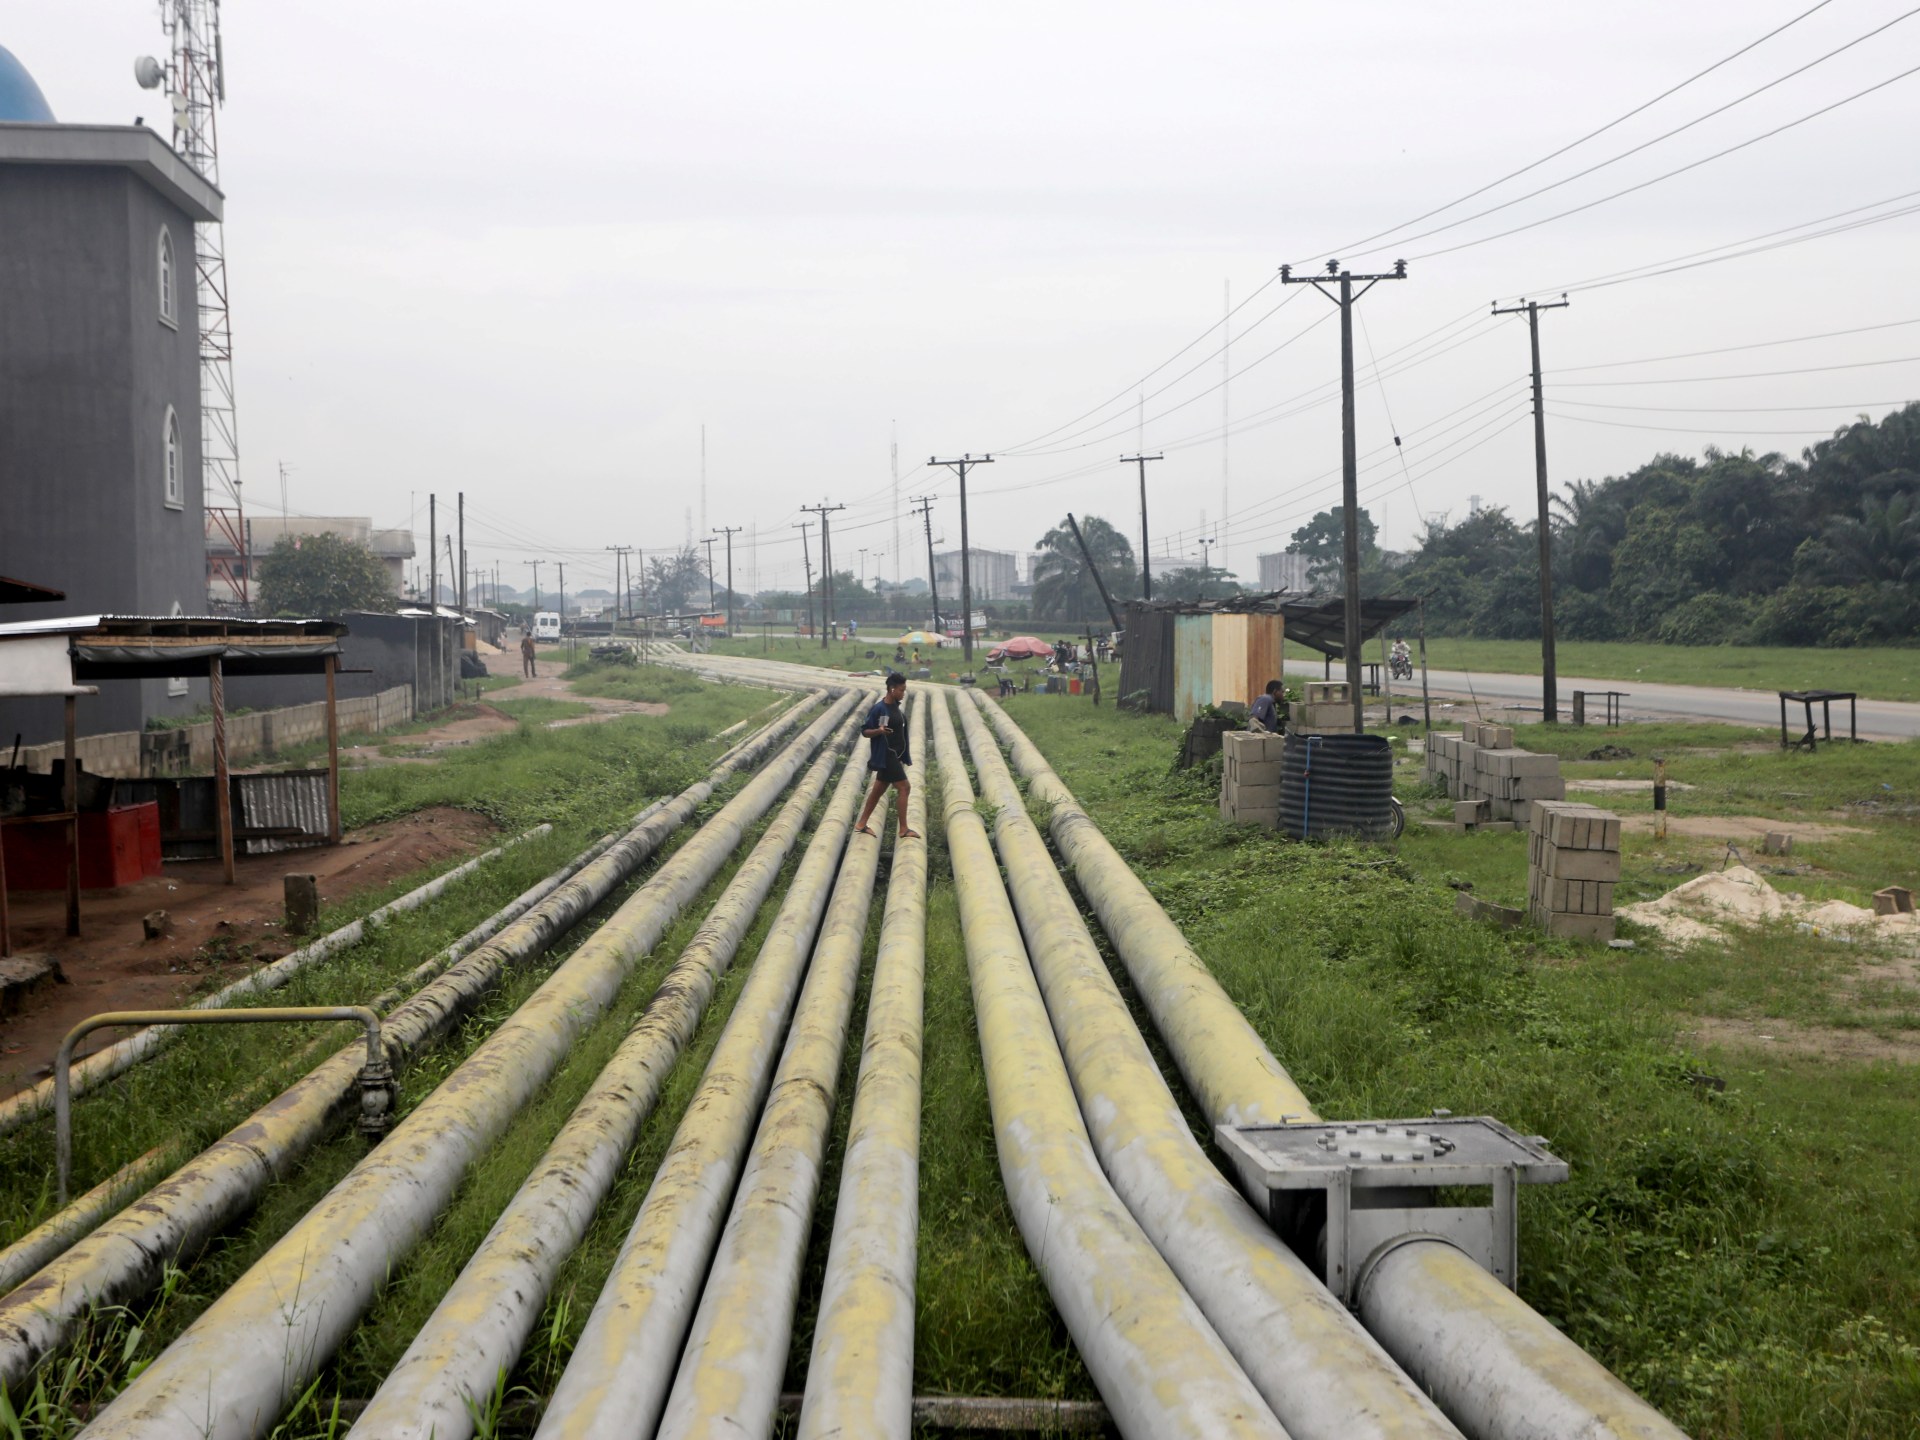 Political crisis in Nigerian oil capital sparks fears of more economic woes | Oil and Gas